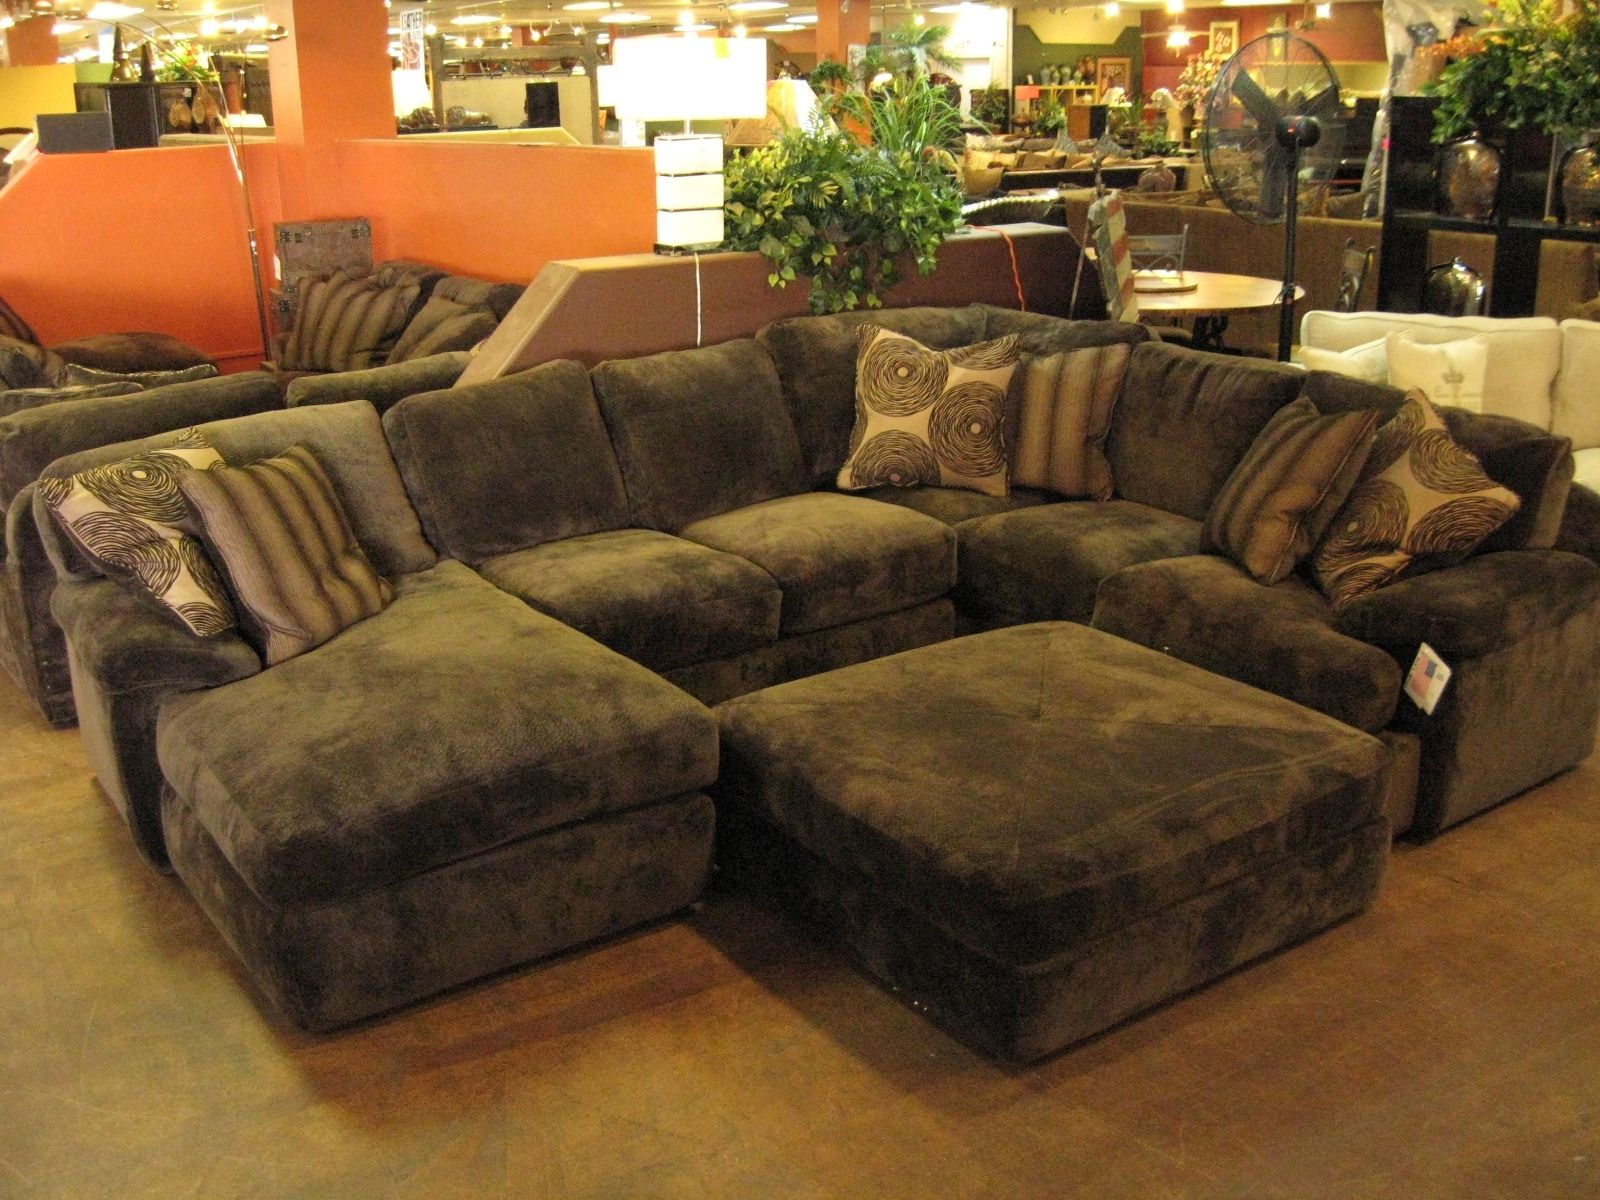 Sofa : 2 Piece Sectional Sofa Where To Buy Sectionals Small Intended For Sectional Sofas With Chaise And Ottoman (Photo 5 of 15)